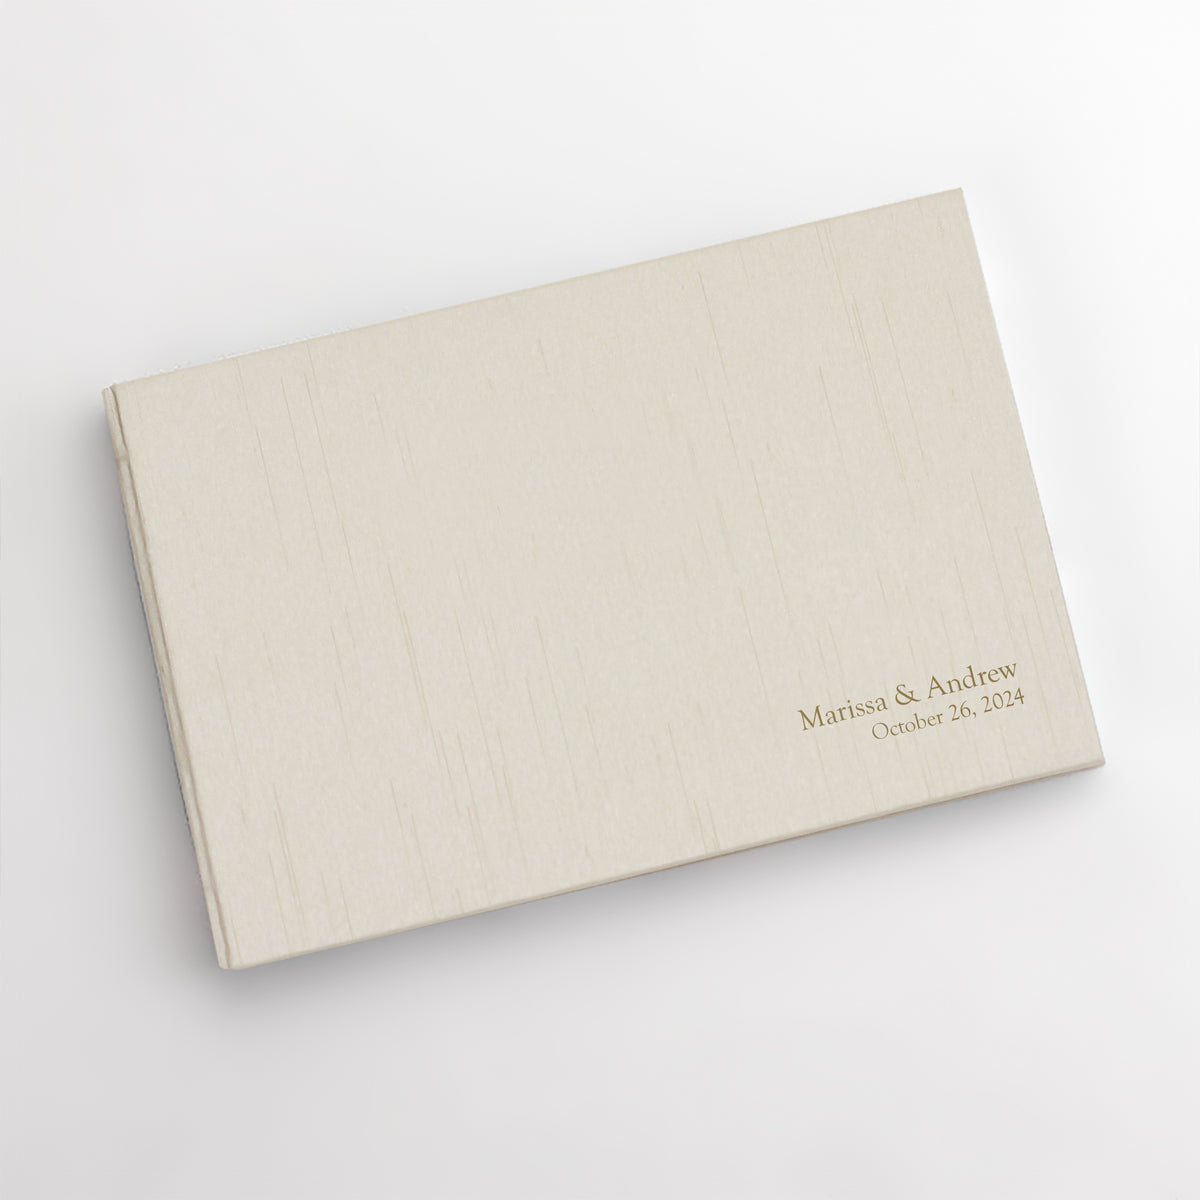 Classic Guestbook | Cover: Champagne Silk | Available Personalized